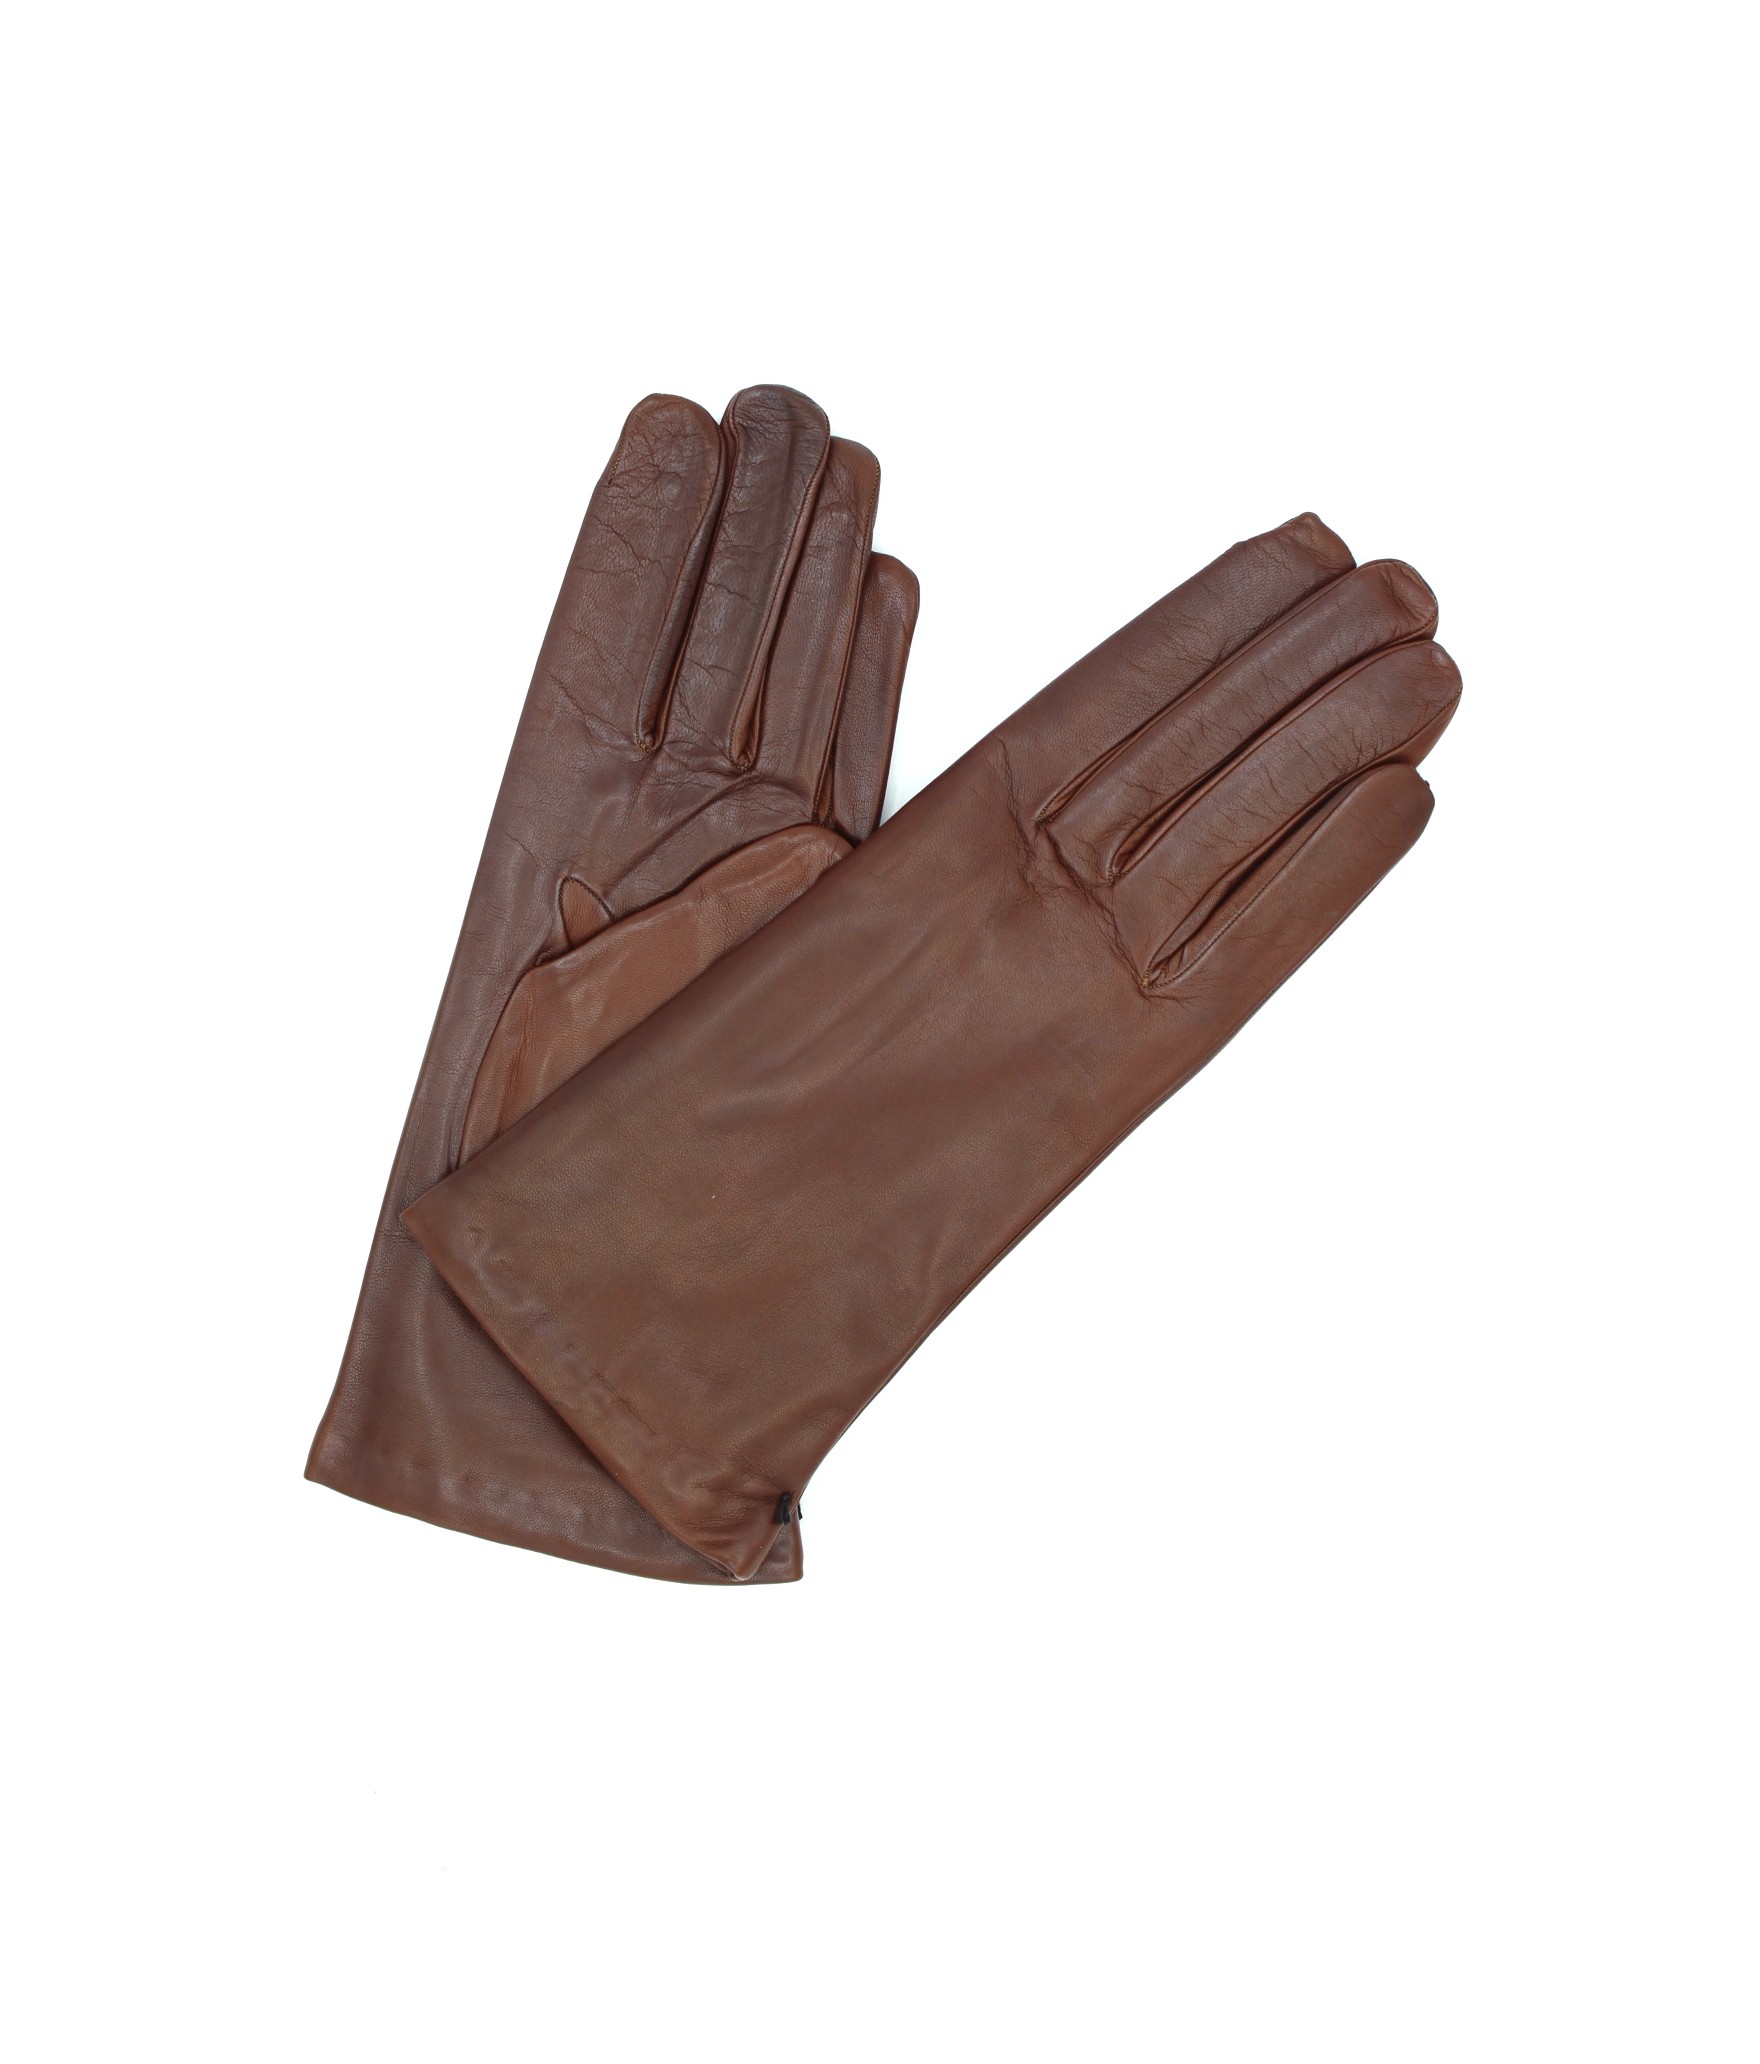 Woman Classic Nappa leather gloves Cashmere lined Mink